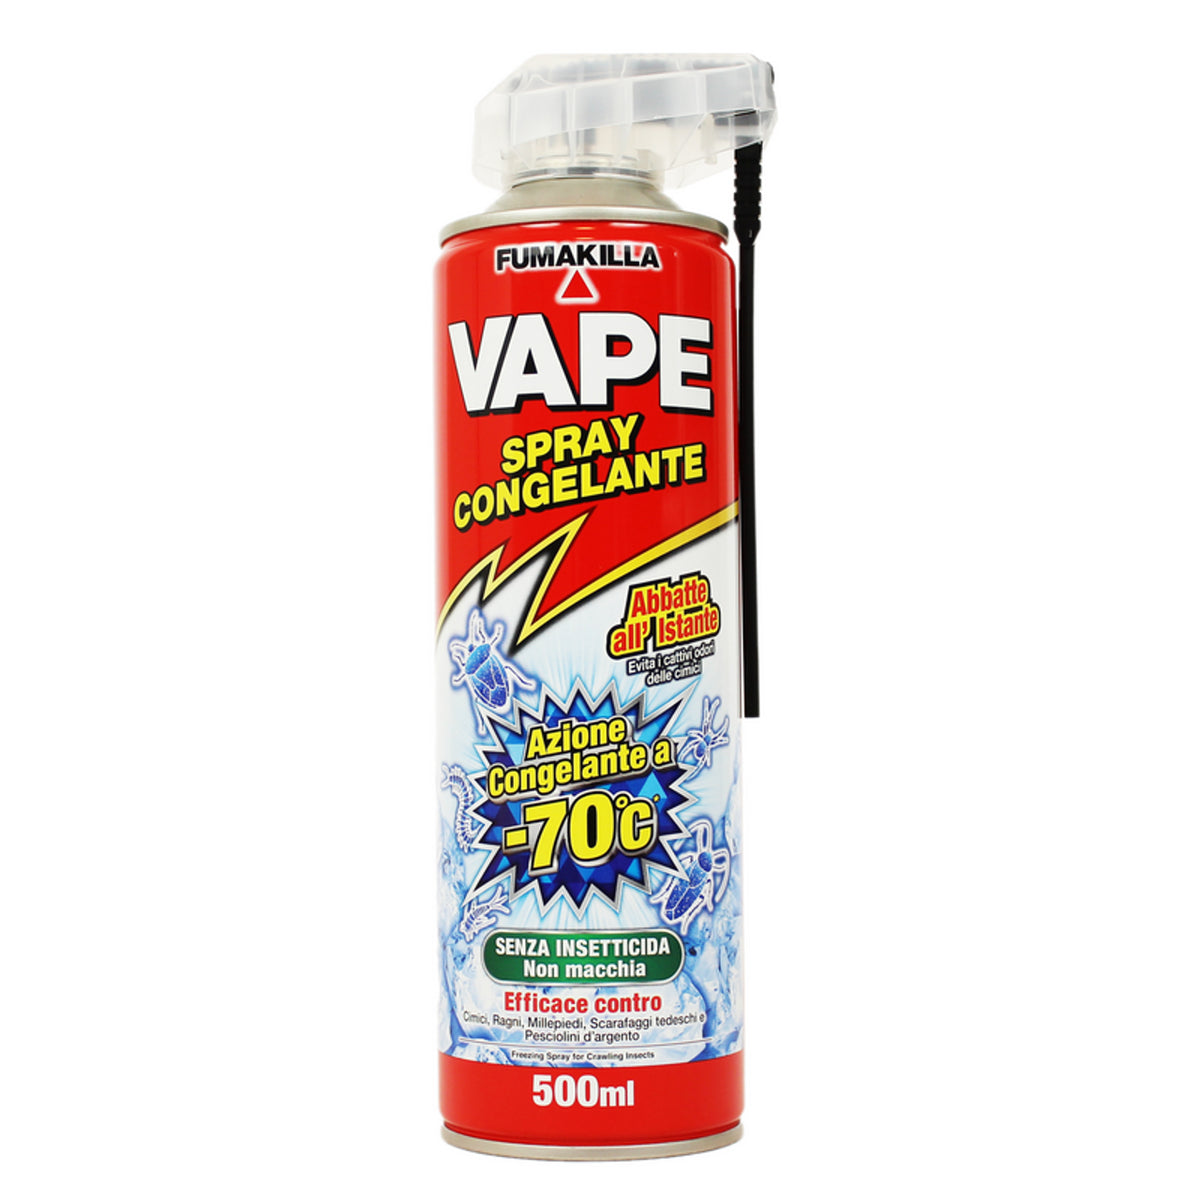 Freezing spray vape cuts off insecticide 500 ml instantly